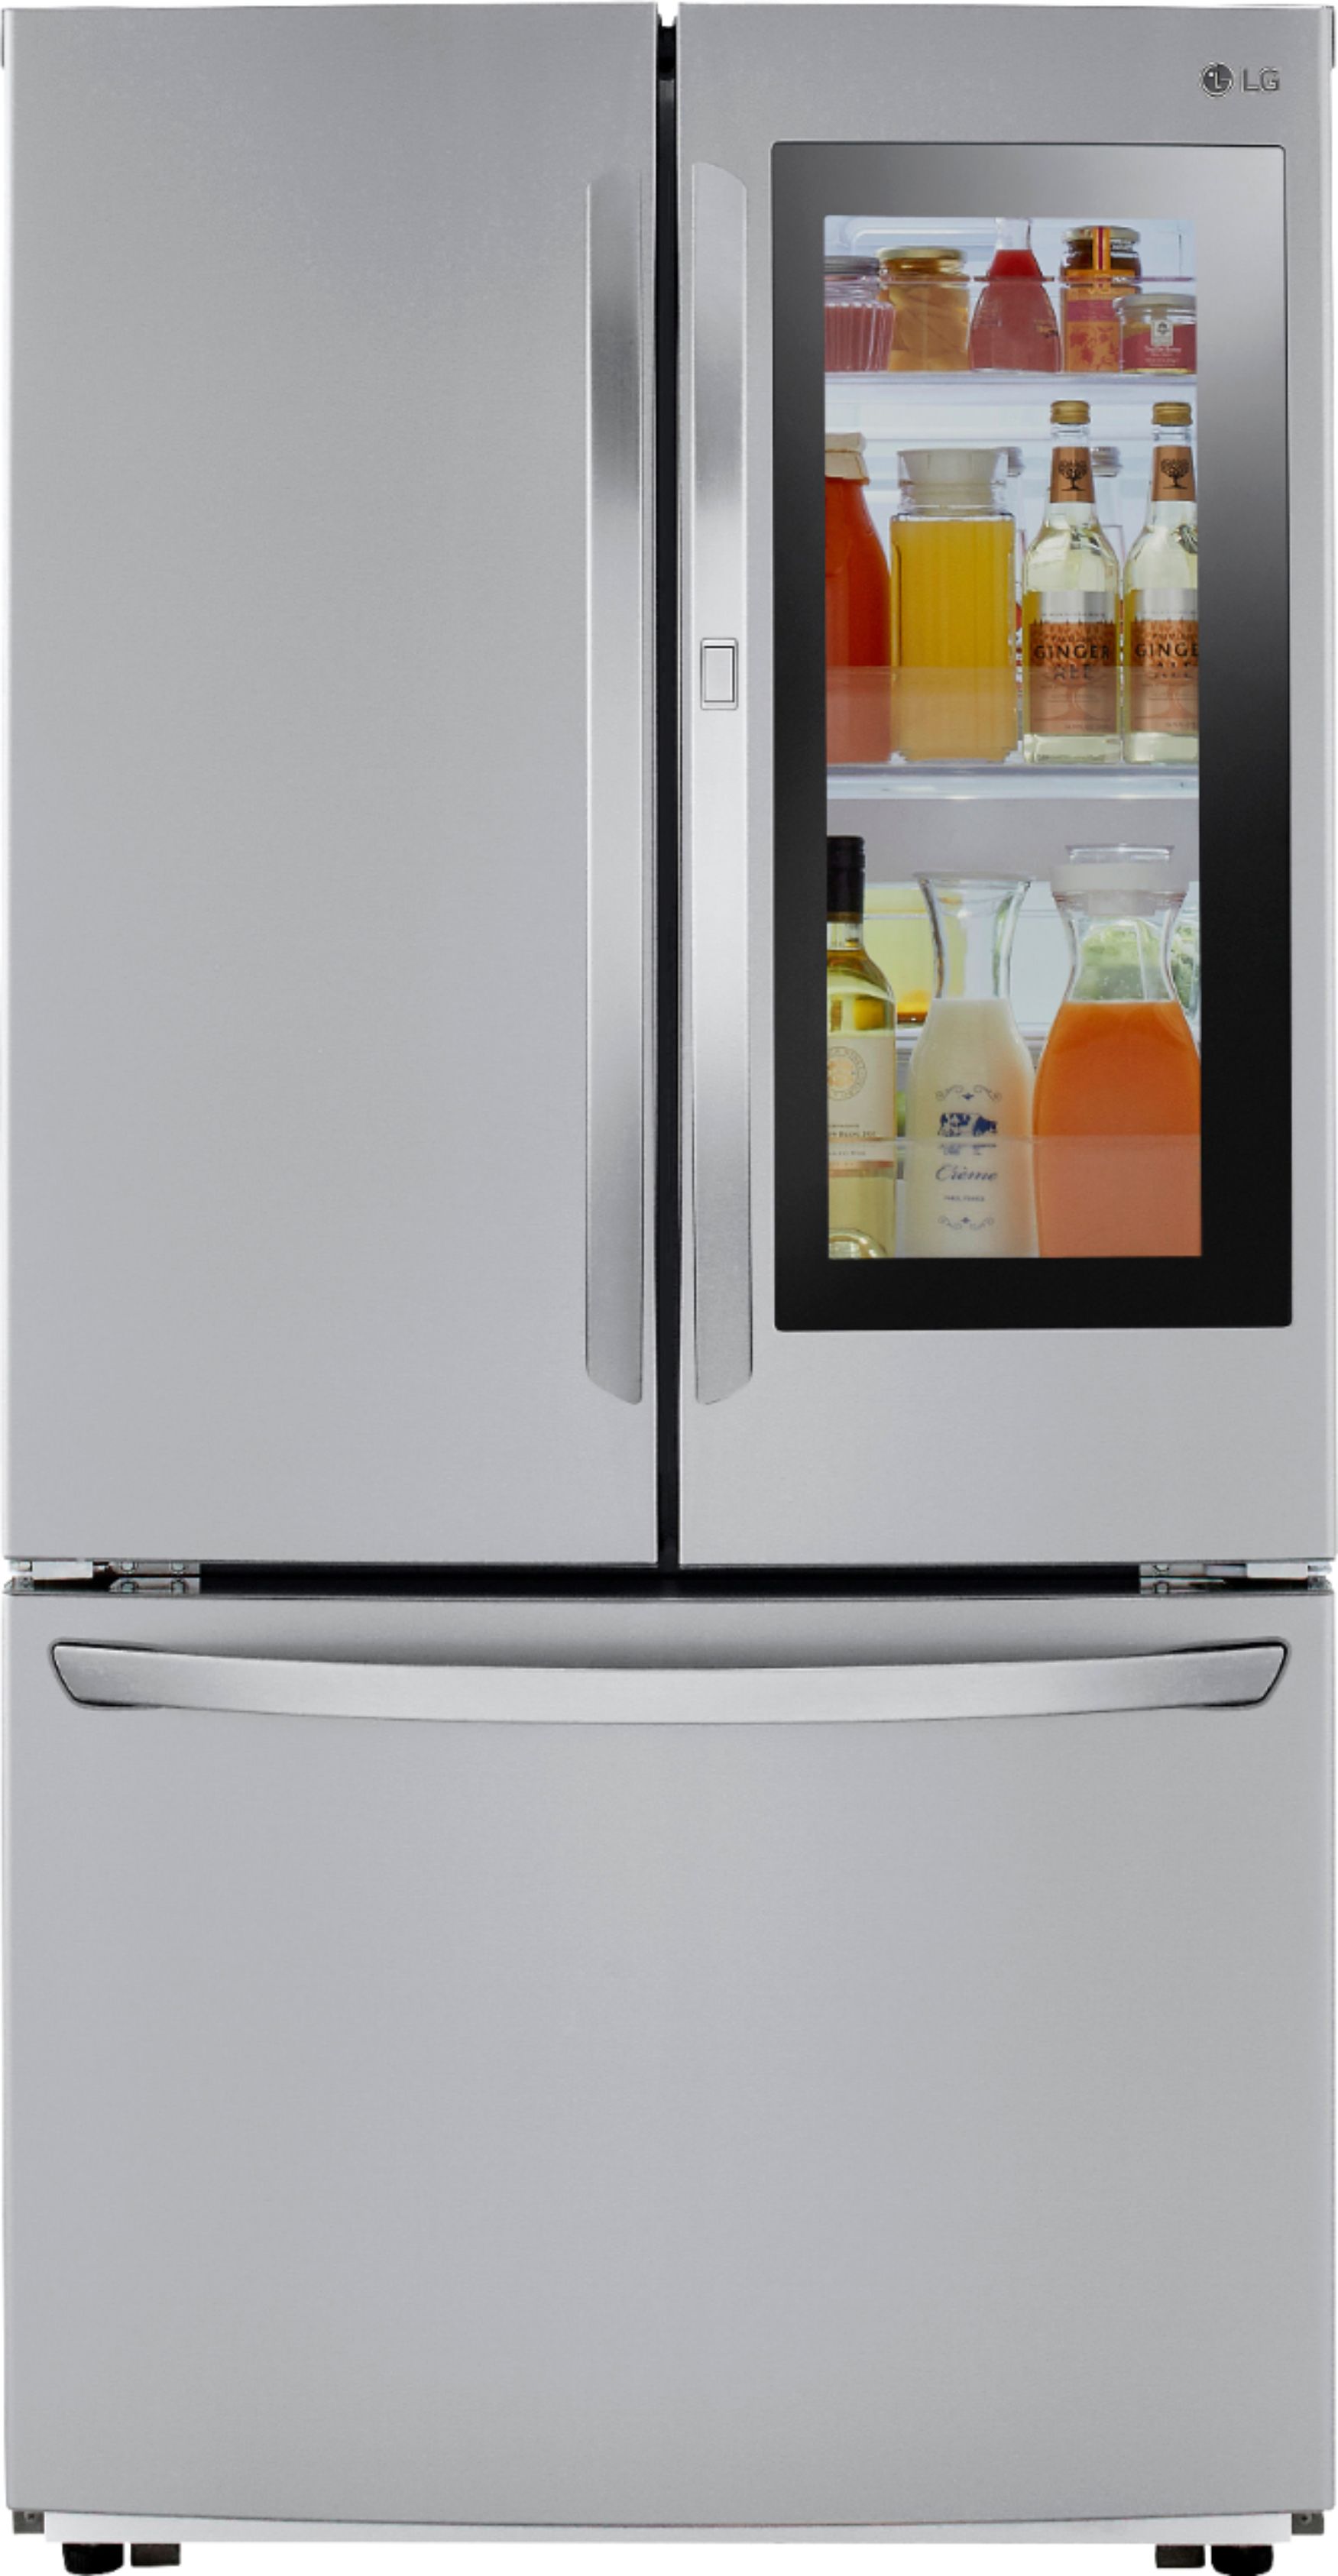 LG 22.6 Cu. French InstaView Counter-Depth Refrigerator with Ice Maker Stainless Steel LFCC23596S - Best Buy